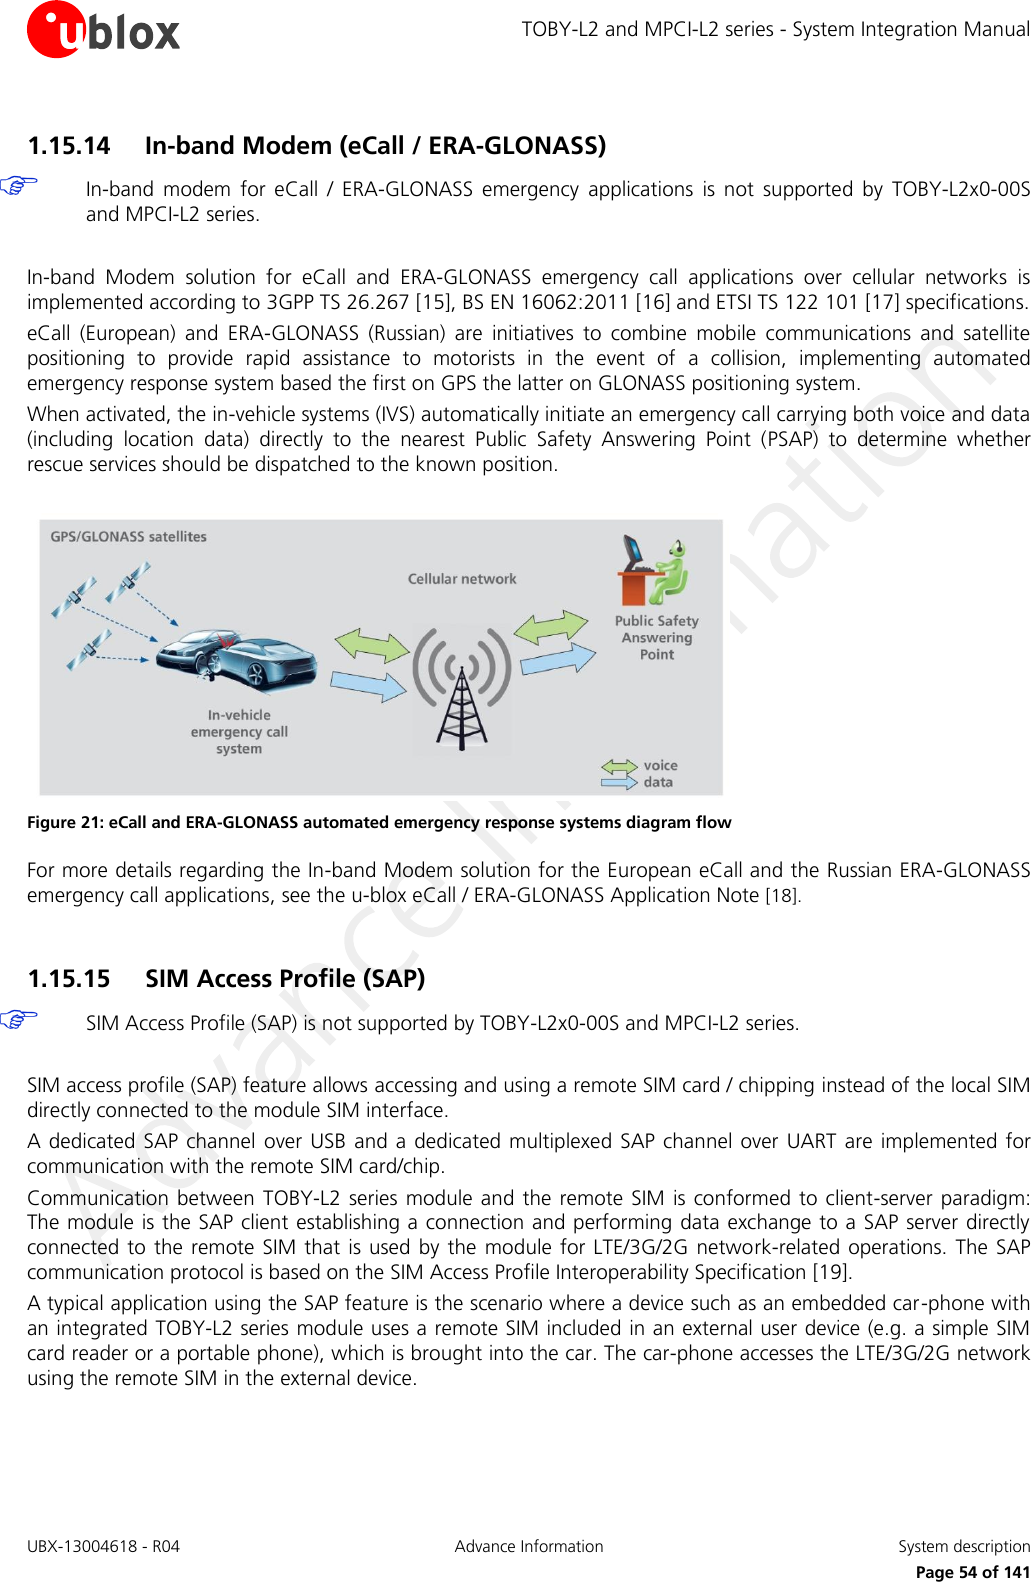 TOBY-L2 and MPCI-L2 series - System Integration Manual UBX-13004618 - R04  Advance Information  System description     Page 54 of 141 1.15.14 In-band Modem (eCall / ERA-GLONASS)  In-band  modem  for  eCall  /  ERA-GLONASS  emergency  applications  is  not  supported  by  TOBY-L2x0-00S and MPCI-L2 series.  In-band  Modem  solution  for  eCall  and  ERA-GLONASS  emergency  call  applications  over  cellular  networks  is implemented according to 3GPP TS 26.267 [15], BS EN 16062:2011 [16] and ETSI TS 122 101 [17] specifications. eCall  (European)  and  ERA-GLONASS  (Russian)  are  initiatives  to  combine  mobile  communications  and  satellite positioning  to  provide  rapid  assistance  to  motorists  in  the  event  of  a  collision,  implementing  automated emergency response system based the first on GPS the latter on GLONASS positioning system. When activated, the in-vehicle systems (IVS) automatically initiate an emergency call carrying both voice and data (including  location  data)  directly  to  the  nearest  Public  Safety  Answering  Point  (PSAP)  to  determine  whether rescue services should be dispatched to the known position.   Figure 21: eCall and ERA-GLONASS automated emergency response systems diagram flow For more details regarding the In-band Modem solution for the European eCall and the Russian ERA-GLONASS emergency call applications, see the u-blox eCall / ERA-GLONASS Application Note [18].  1.15.15 SIM Access Profile (SAP)  SIM Access Profile (SAP) is not supported by TOBY-L2x0-00S and MPCI-L2 series.  SIM access profile (SAP) feature allows accessing and using a remote SIM card / chipping instead of the local SIM directly connected to the module SIM interface. A dedicated SAP channel  over USB  and a dedicated  multiplexed SAP channel over  UART  are implemented  for communication with the remote SIM card/chip. Communication  between TOBY-L2  series  module  and  the remote SIM is conformed to  client-server  paradigm: The module is the SAP client establishing a connection and performing data exchange to a SAP server directly connected to the remote SIM that is used  by the  module  for  LTE/3G/2G network-related operations. The SAP communication protocol is based on the SIM Access Profile Interoperability Specification [19]. A typical application using the SAP feature is the scenario where a device such as an embedded car-phone with an integrated TOBY-L2 series module uses a remote SIM included in an external user device (e.g. a simple SIM card reader or a portable phone), which is brought into the car. The car-phone accesses the LTE/3G/2G network using the remote SIM in the external device. 